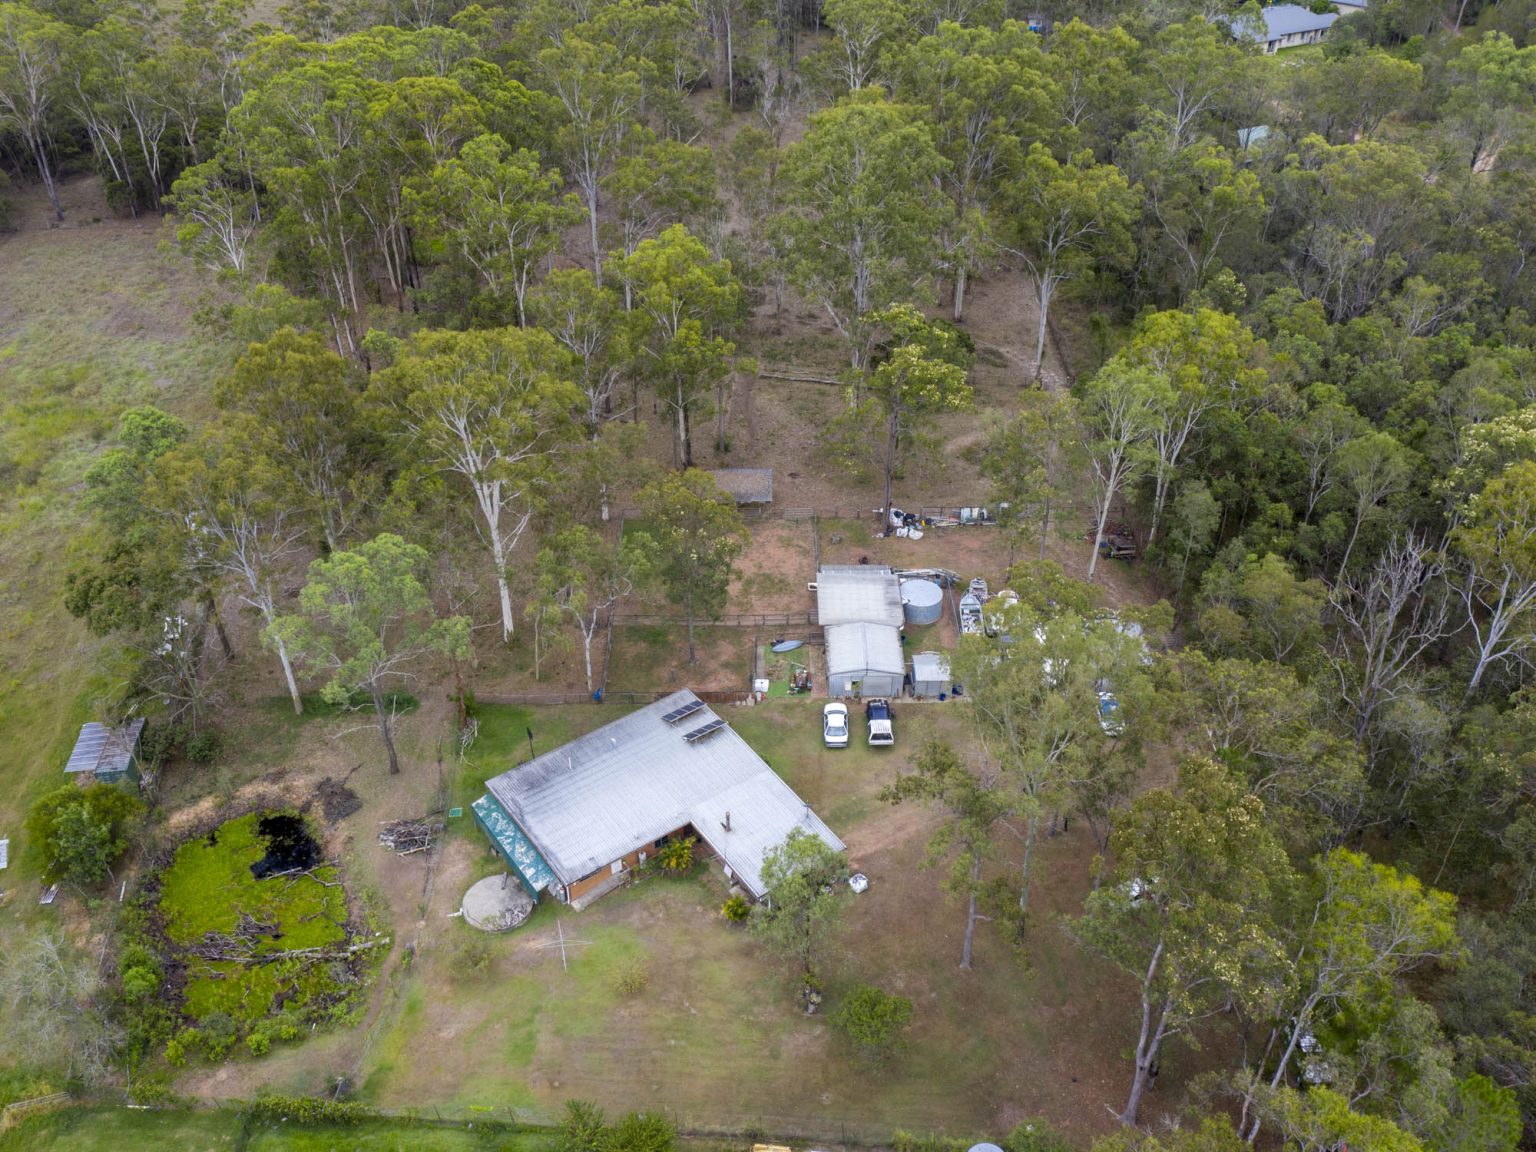 218 Stockleigh Road, STOCKLEIGH, QLD 4280 AUS